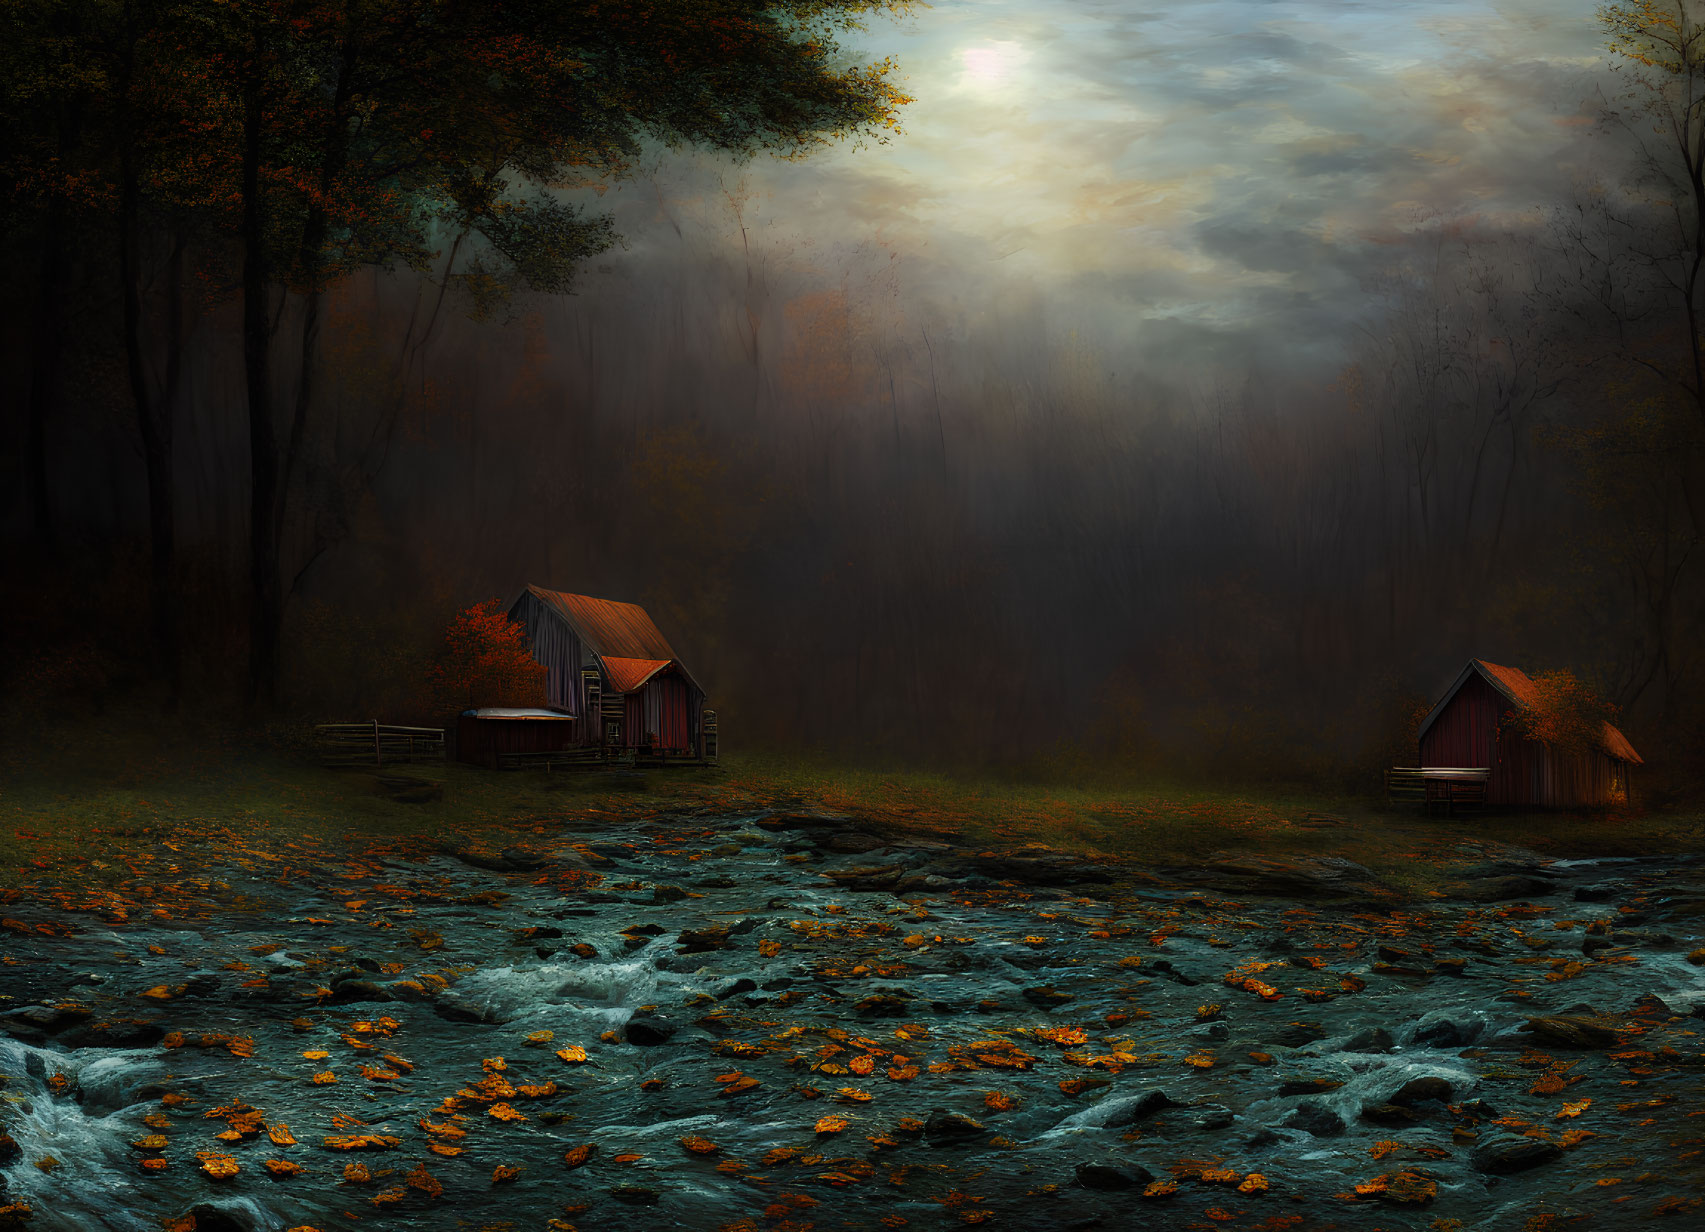 Rustic cabins by misty stream in autumn forest